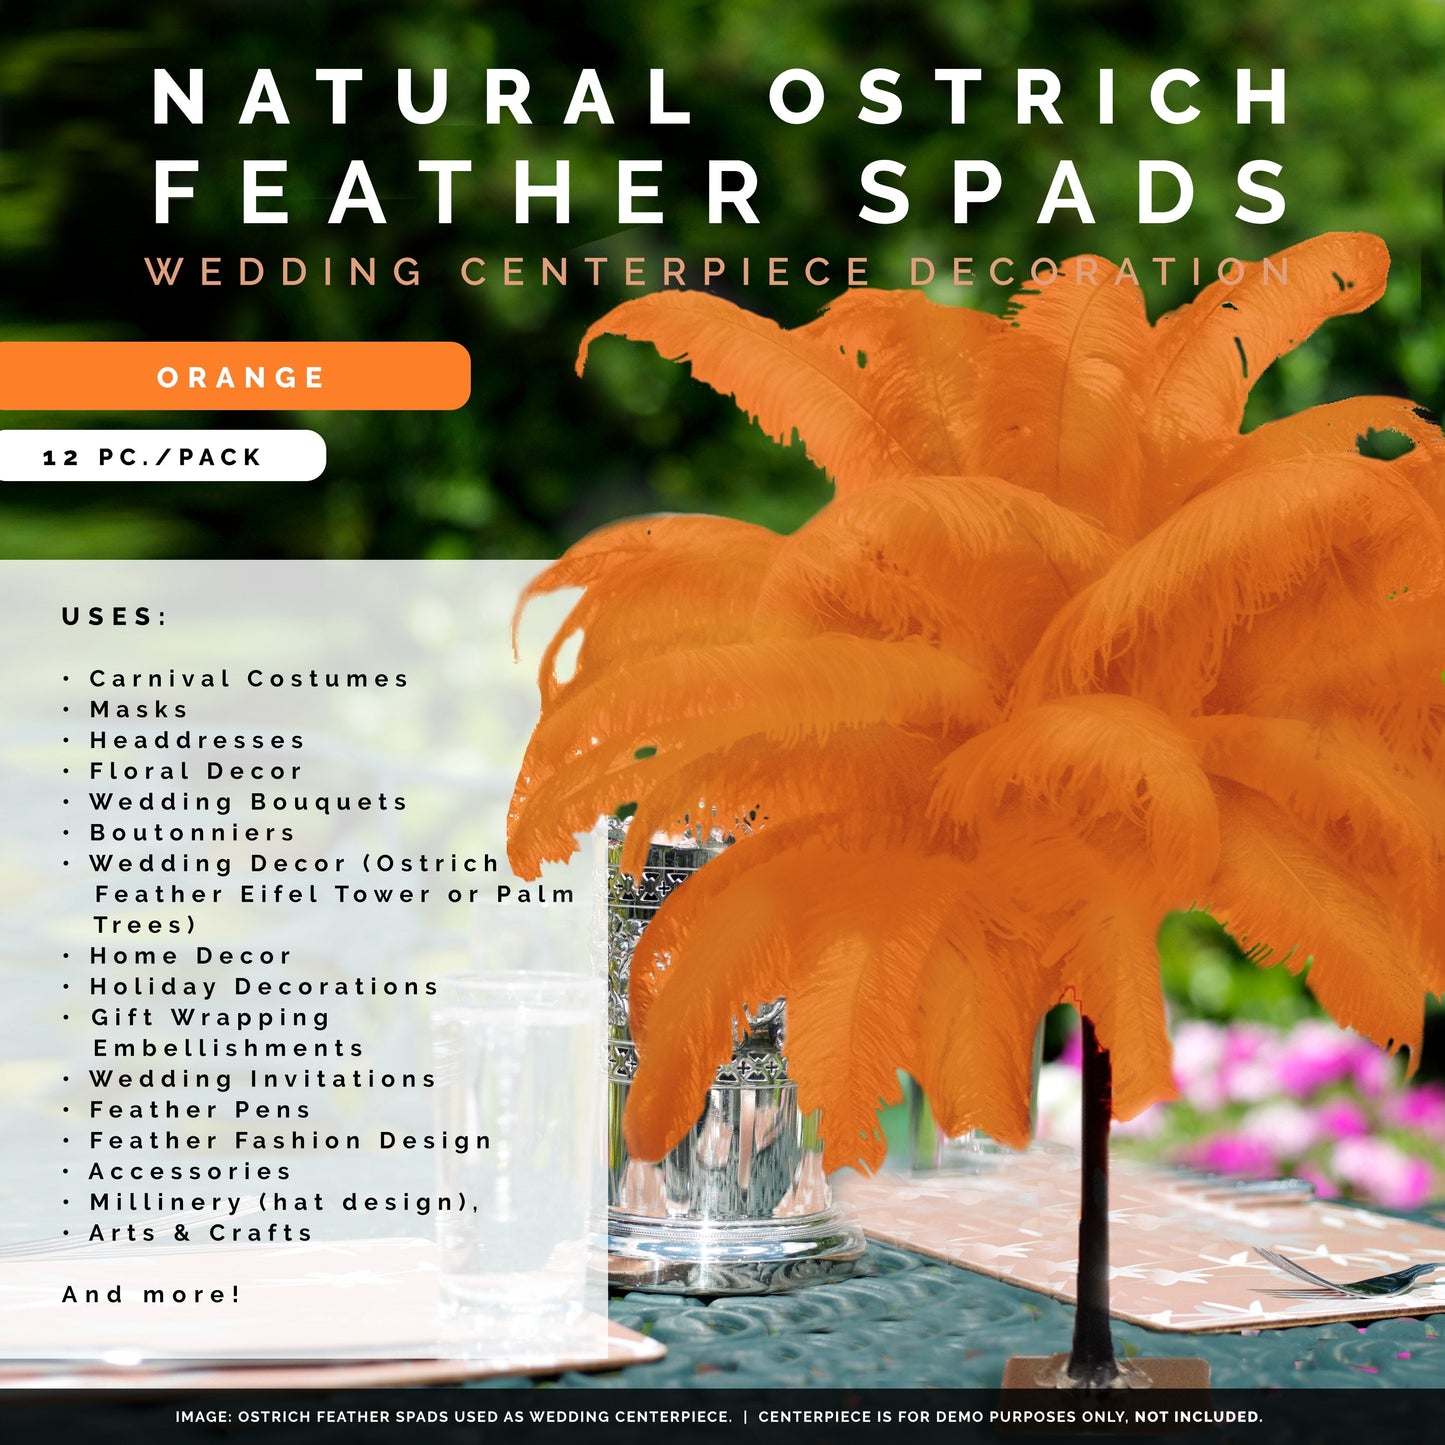 Large Ostrich Feathers - 18-24" Spads - Orange